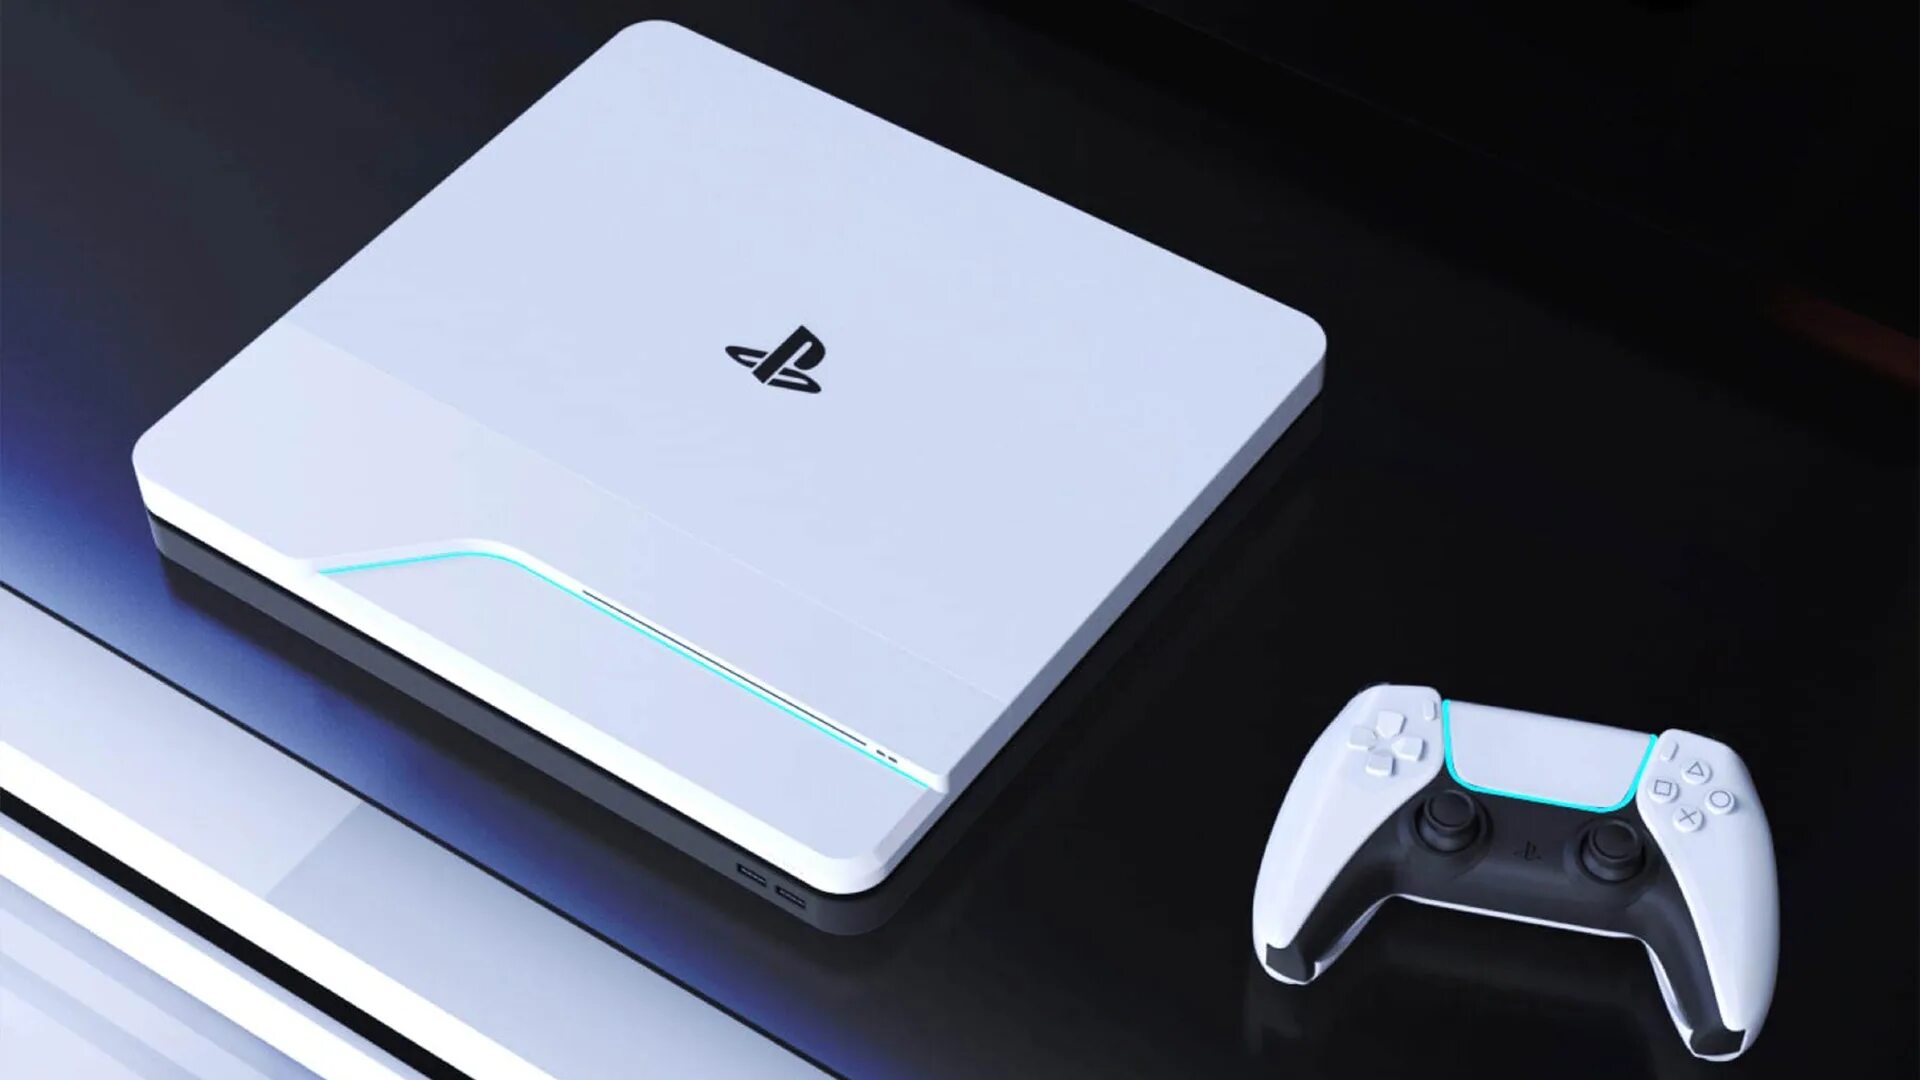 Ps5 r. Sony ps5 2020. Sony PLAYSTATION 5. PS 5. Sony PLAYSTATION ps5 Console. Sony PS 5 Pro.